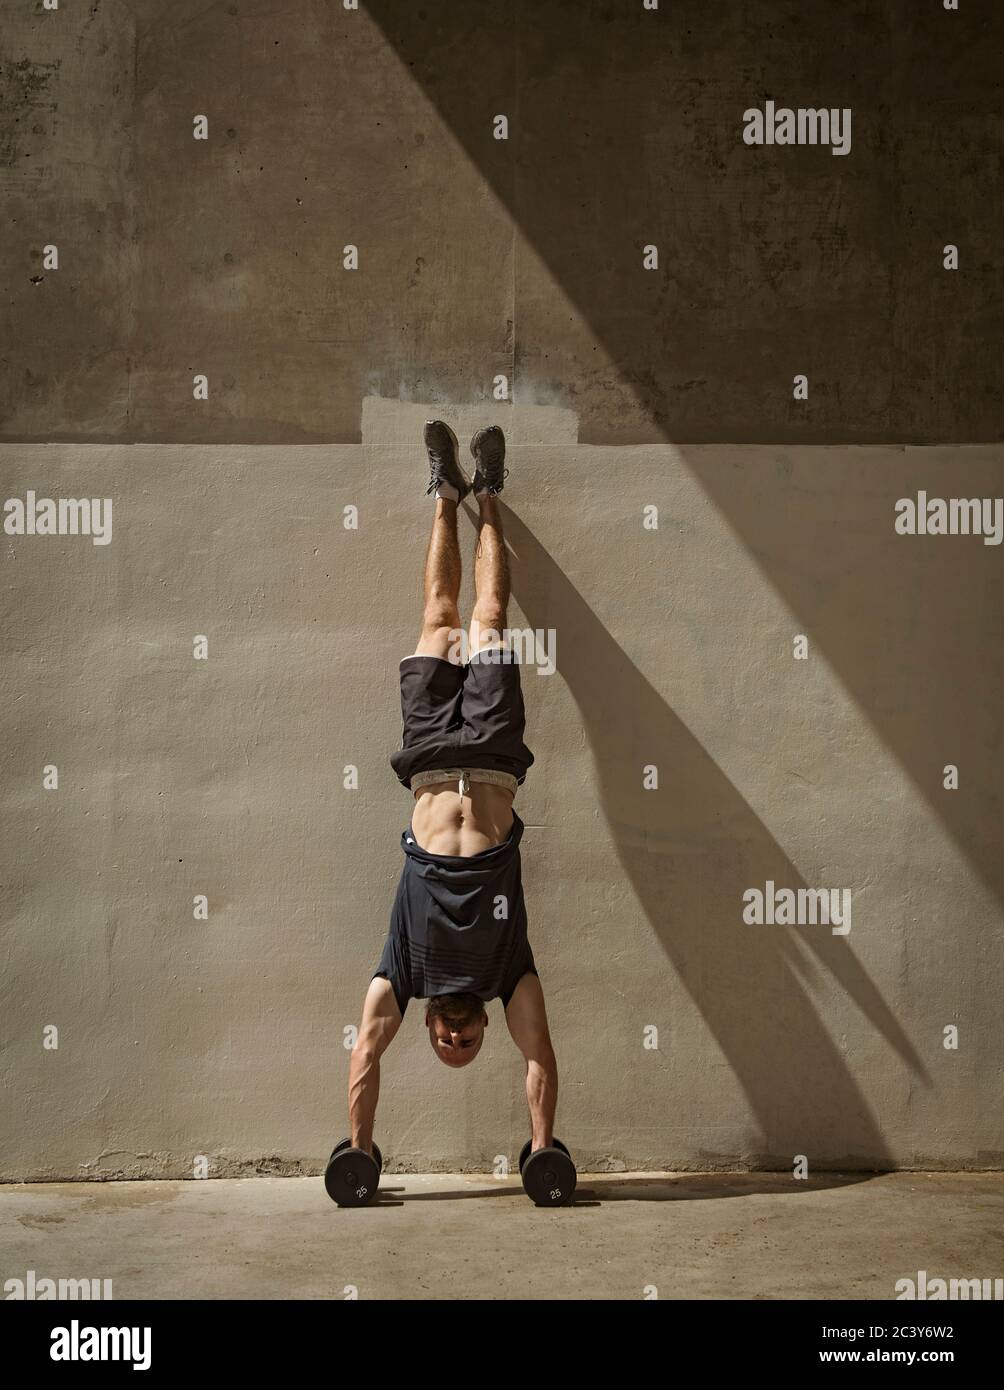 Man doing handstand next to wall Stock Photo